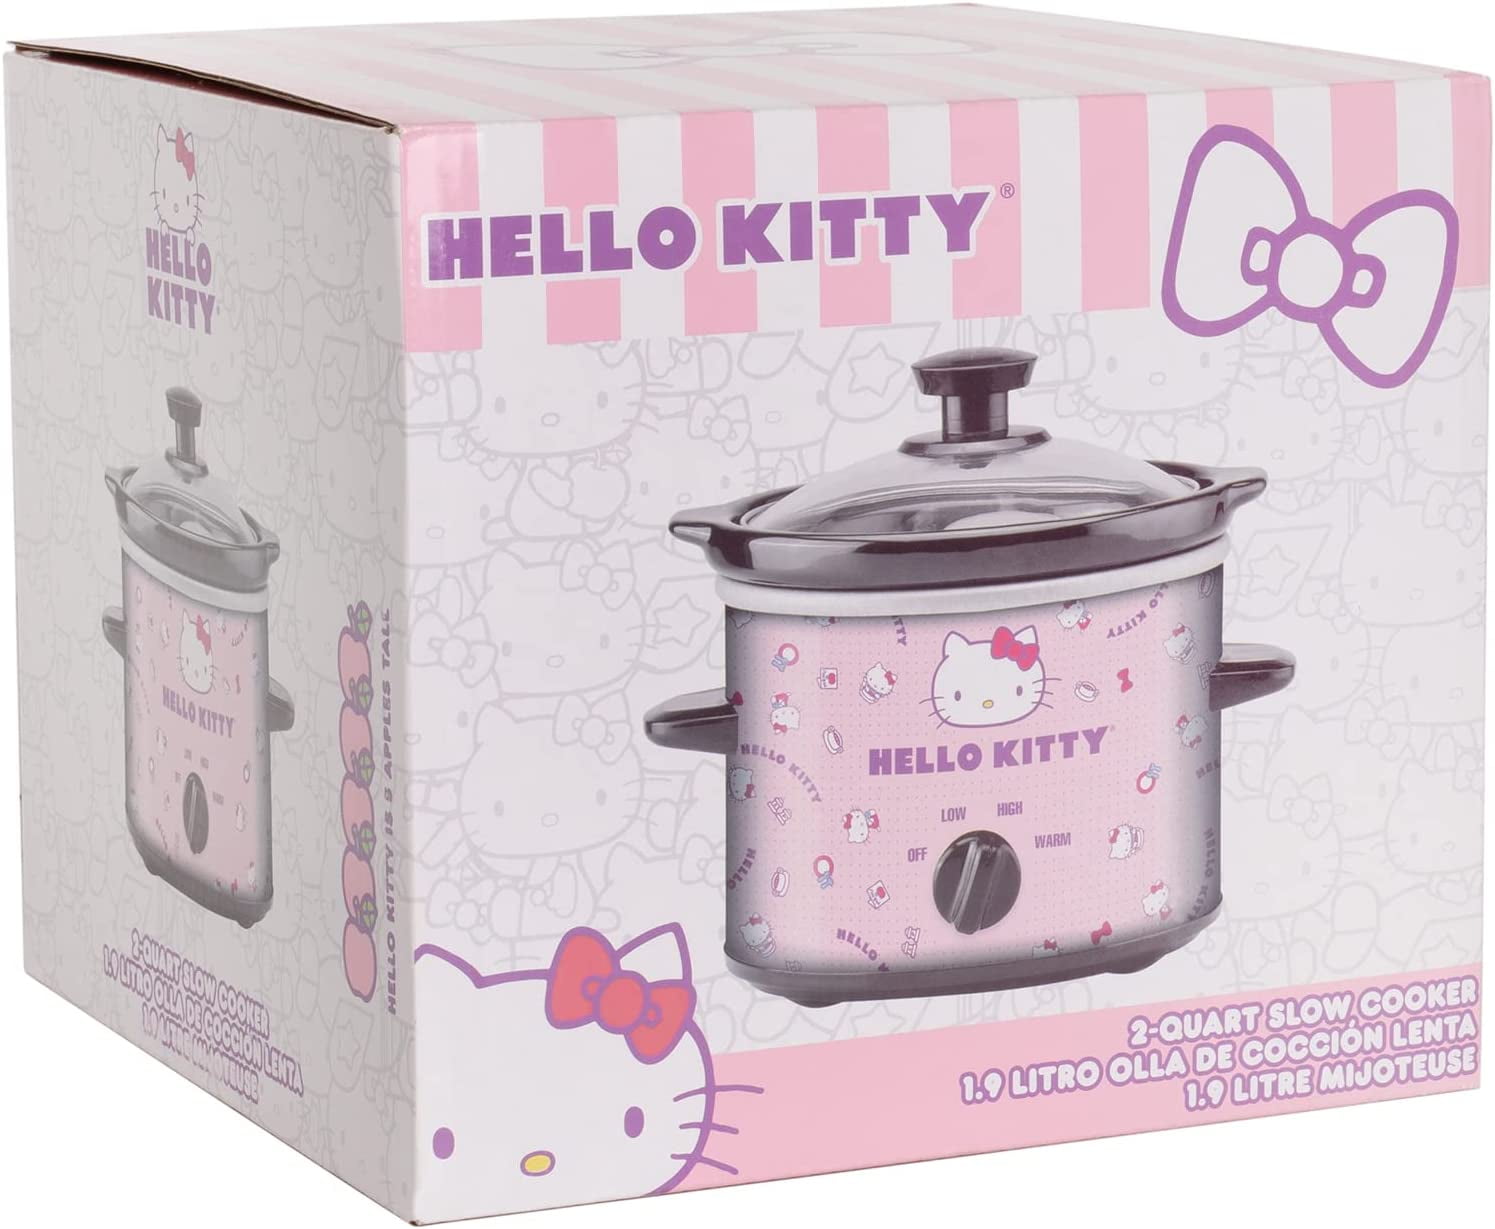  Hello Kitty Slow Cooker - Pink Only $19.99 (Reg. $ 59.99)